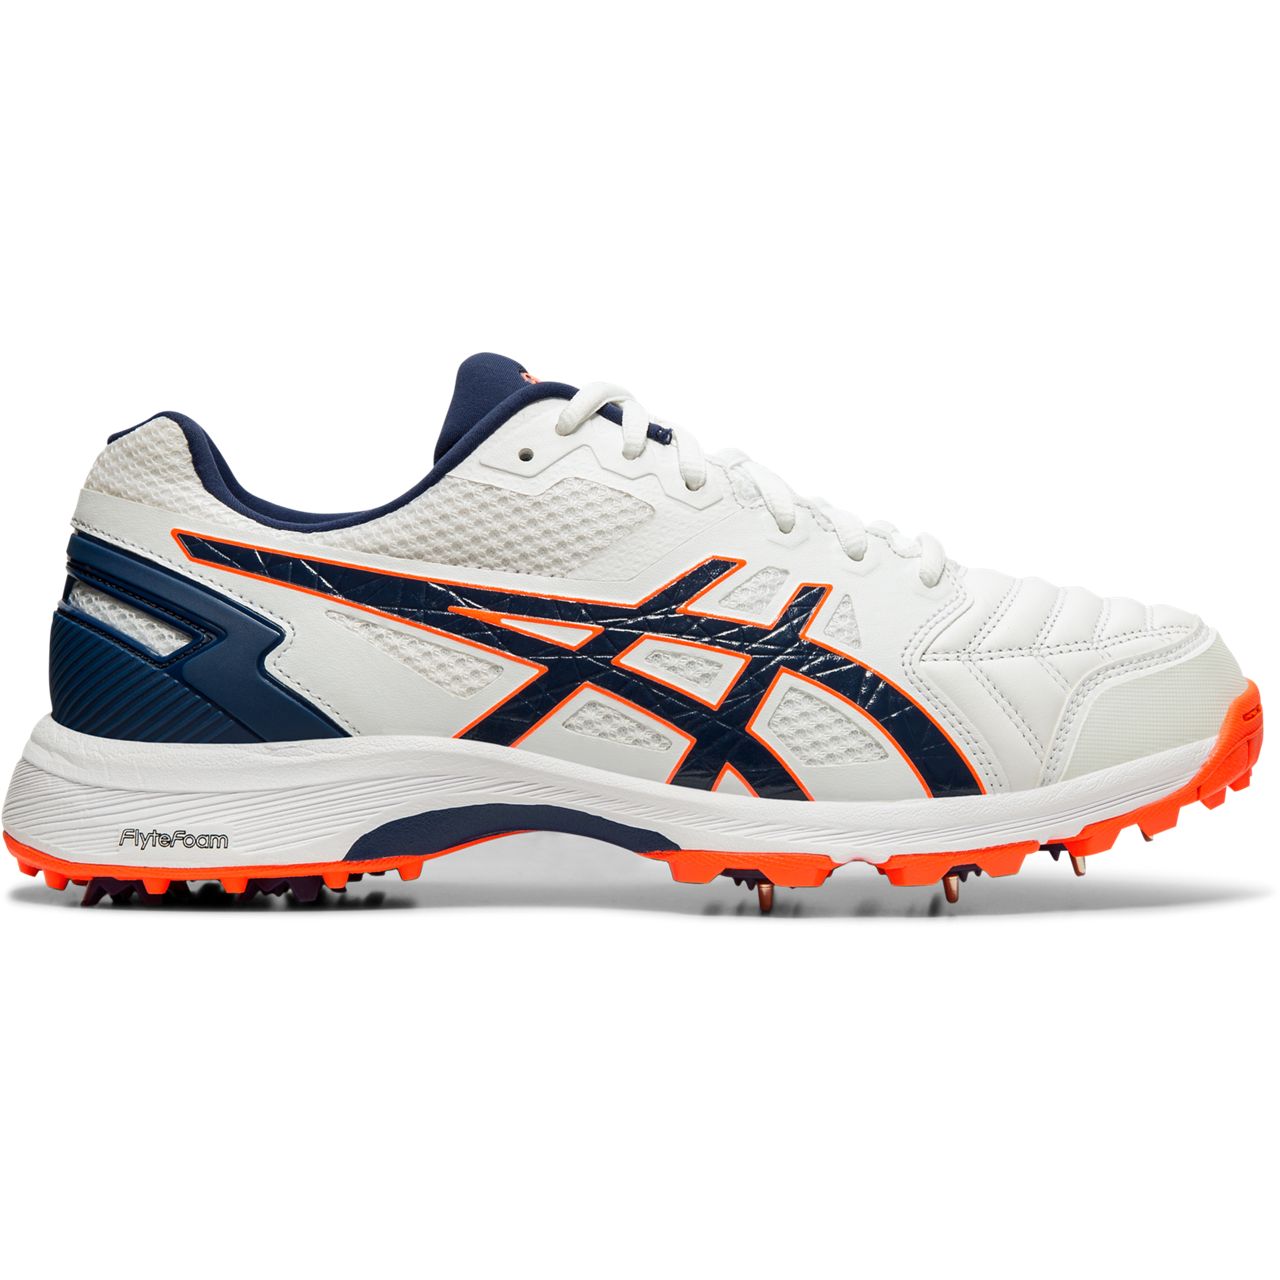 Asics Gel-300 Not Out Spikes – The 